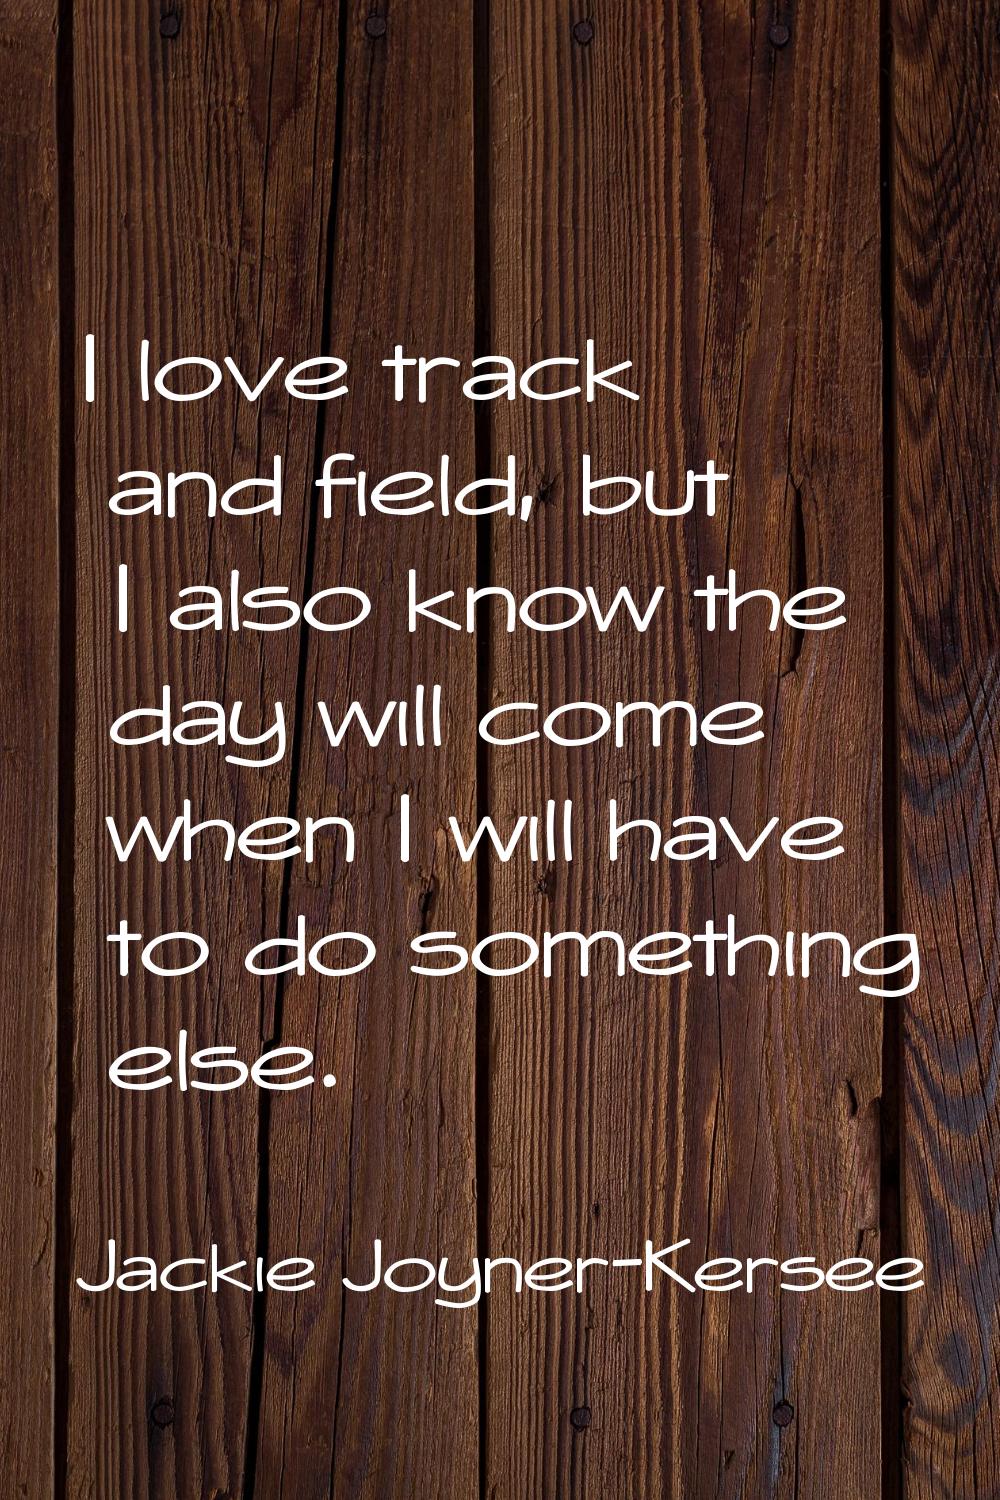 I love track and field, but I also know the day will come when I will have to do something else.